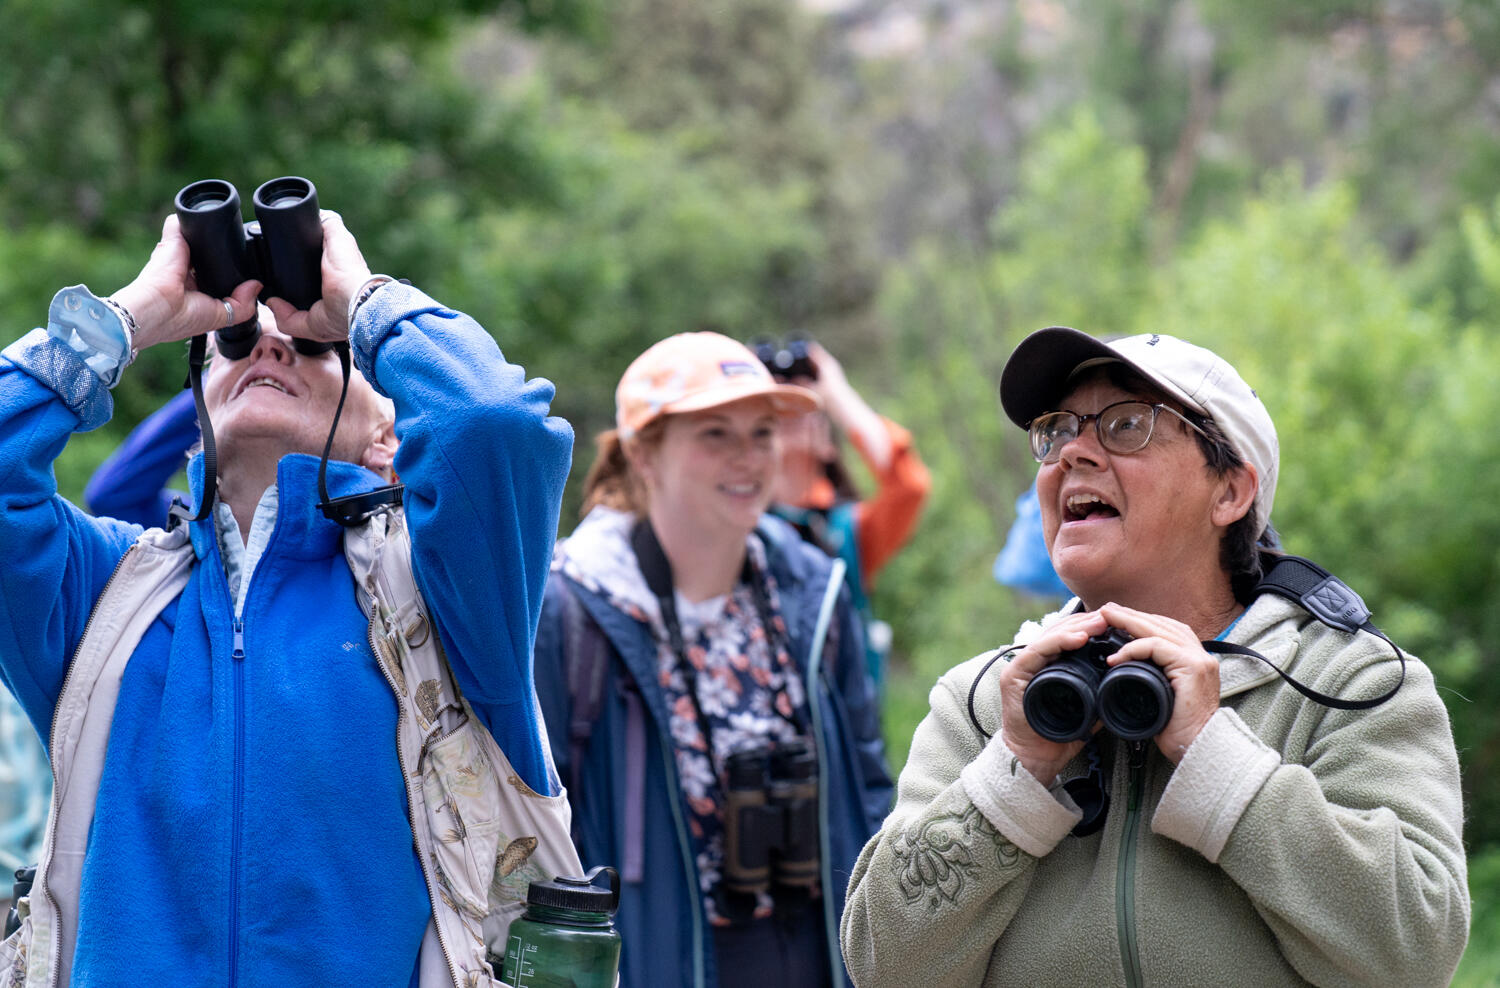 Two people smile while birdwatching.